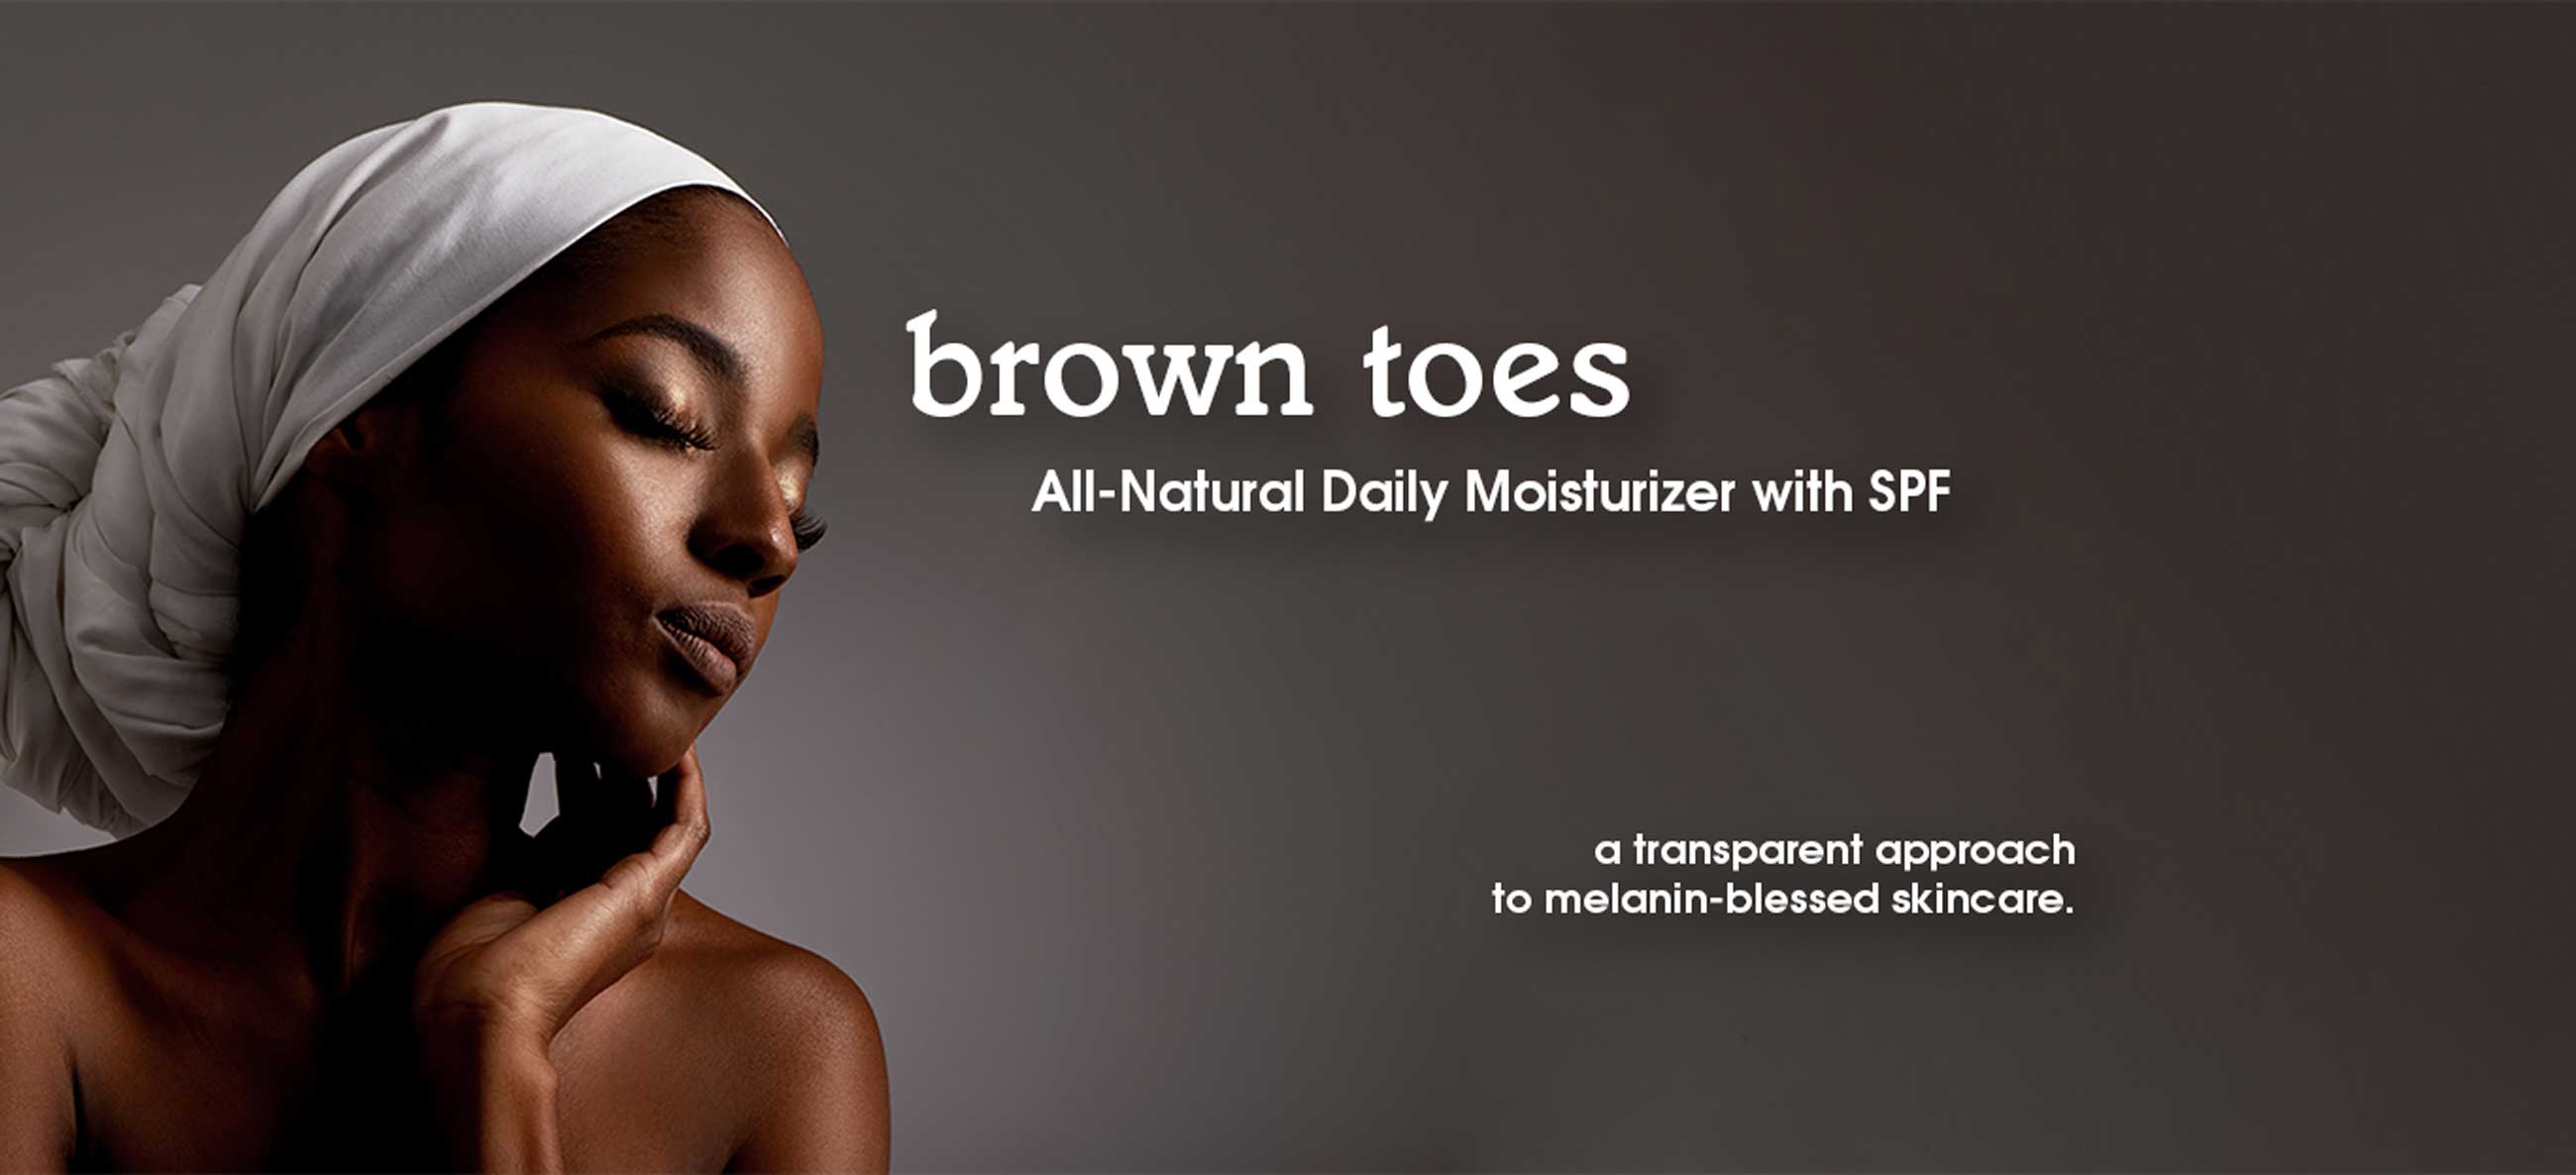 brown toes all-natural daily moisturizer